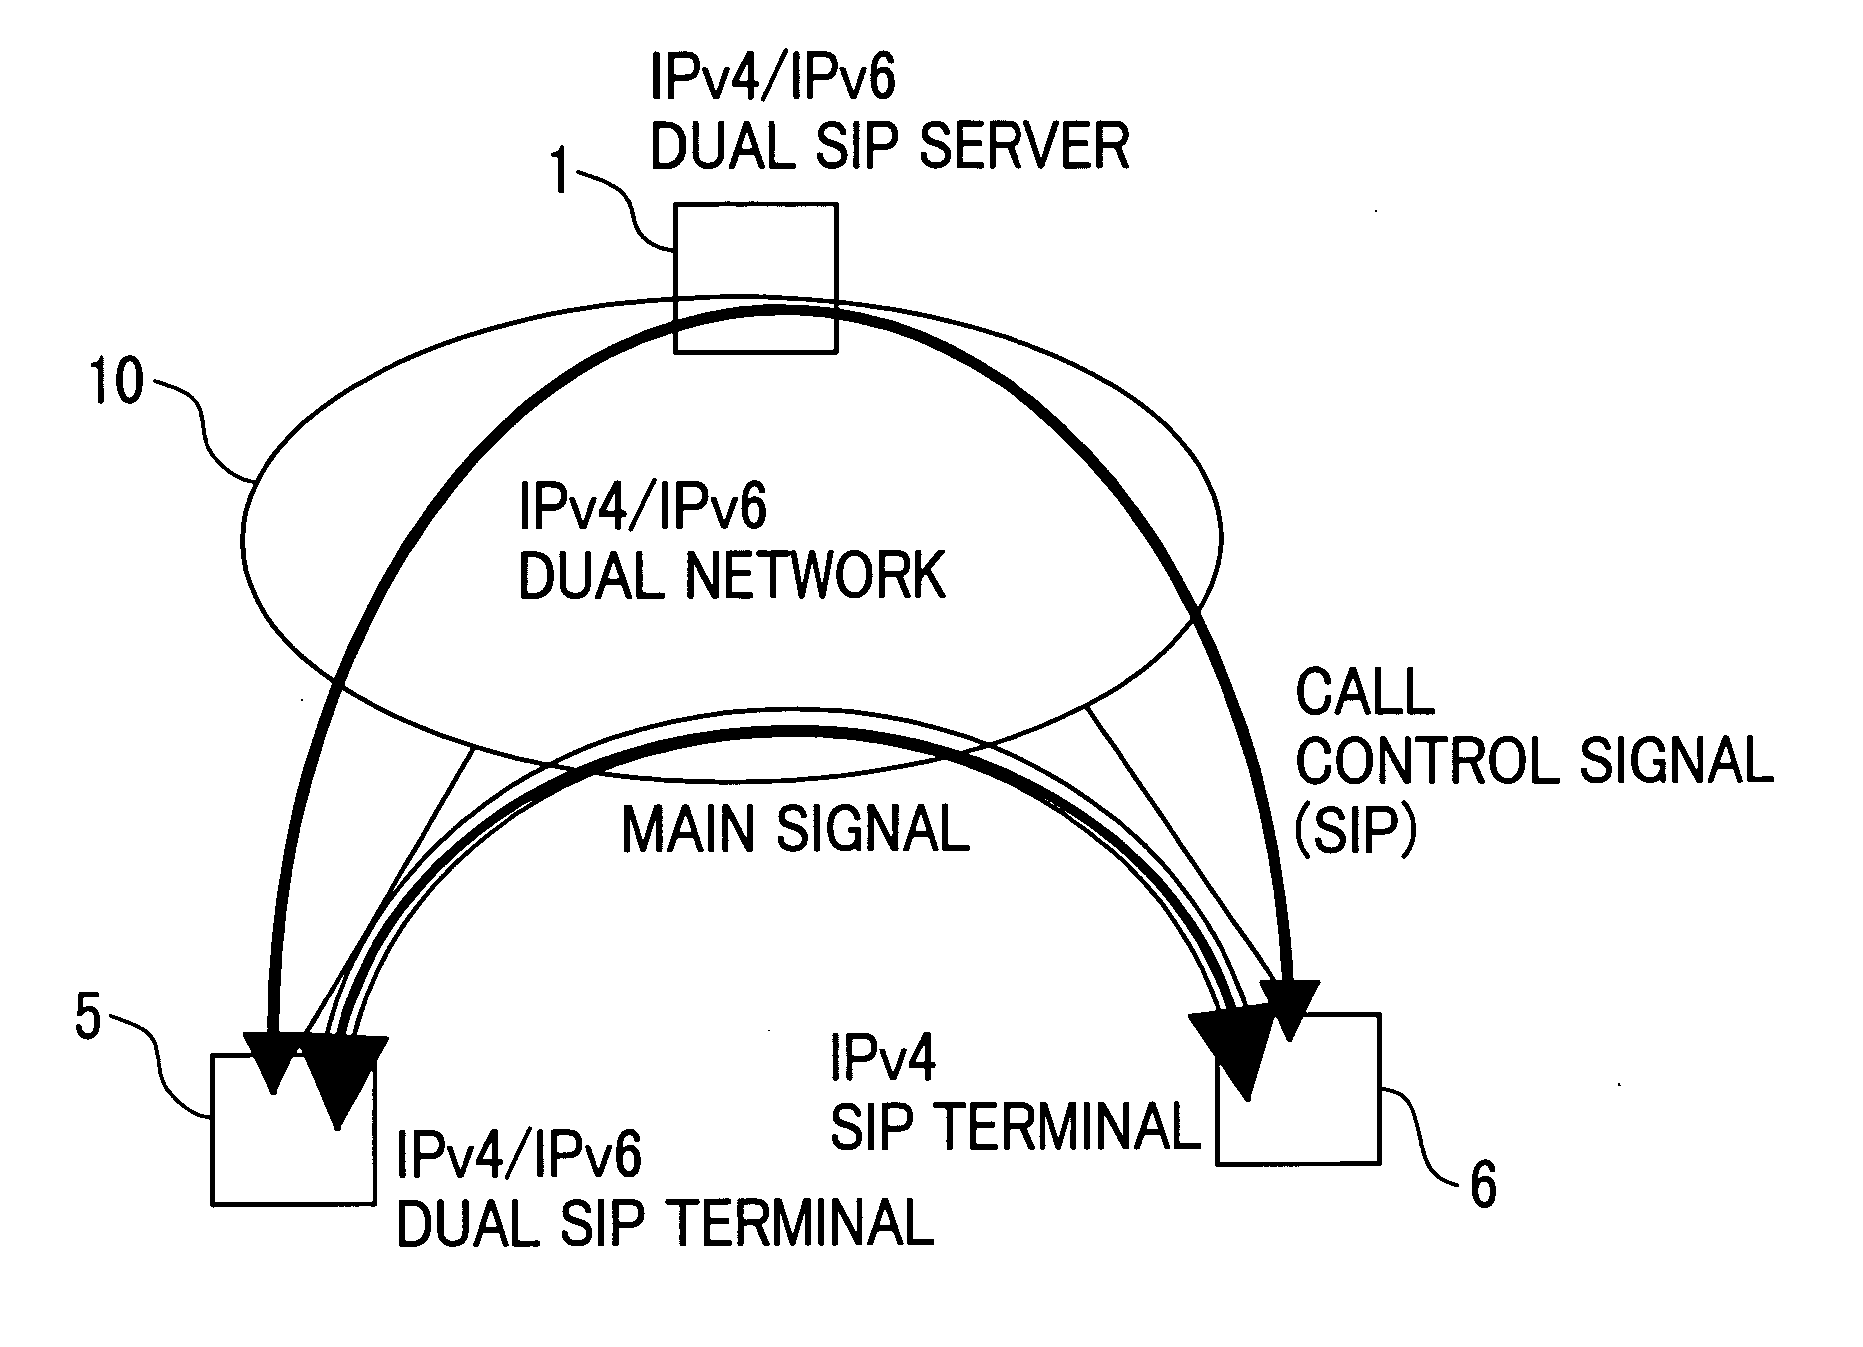 Session control system, communication terminal and servers